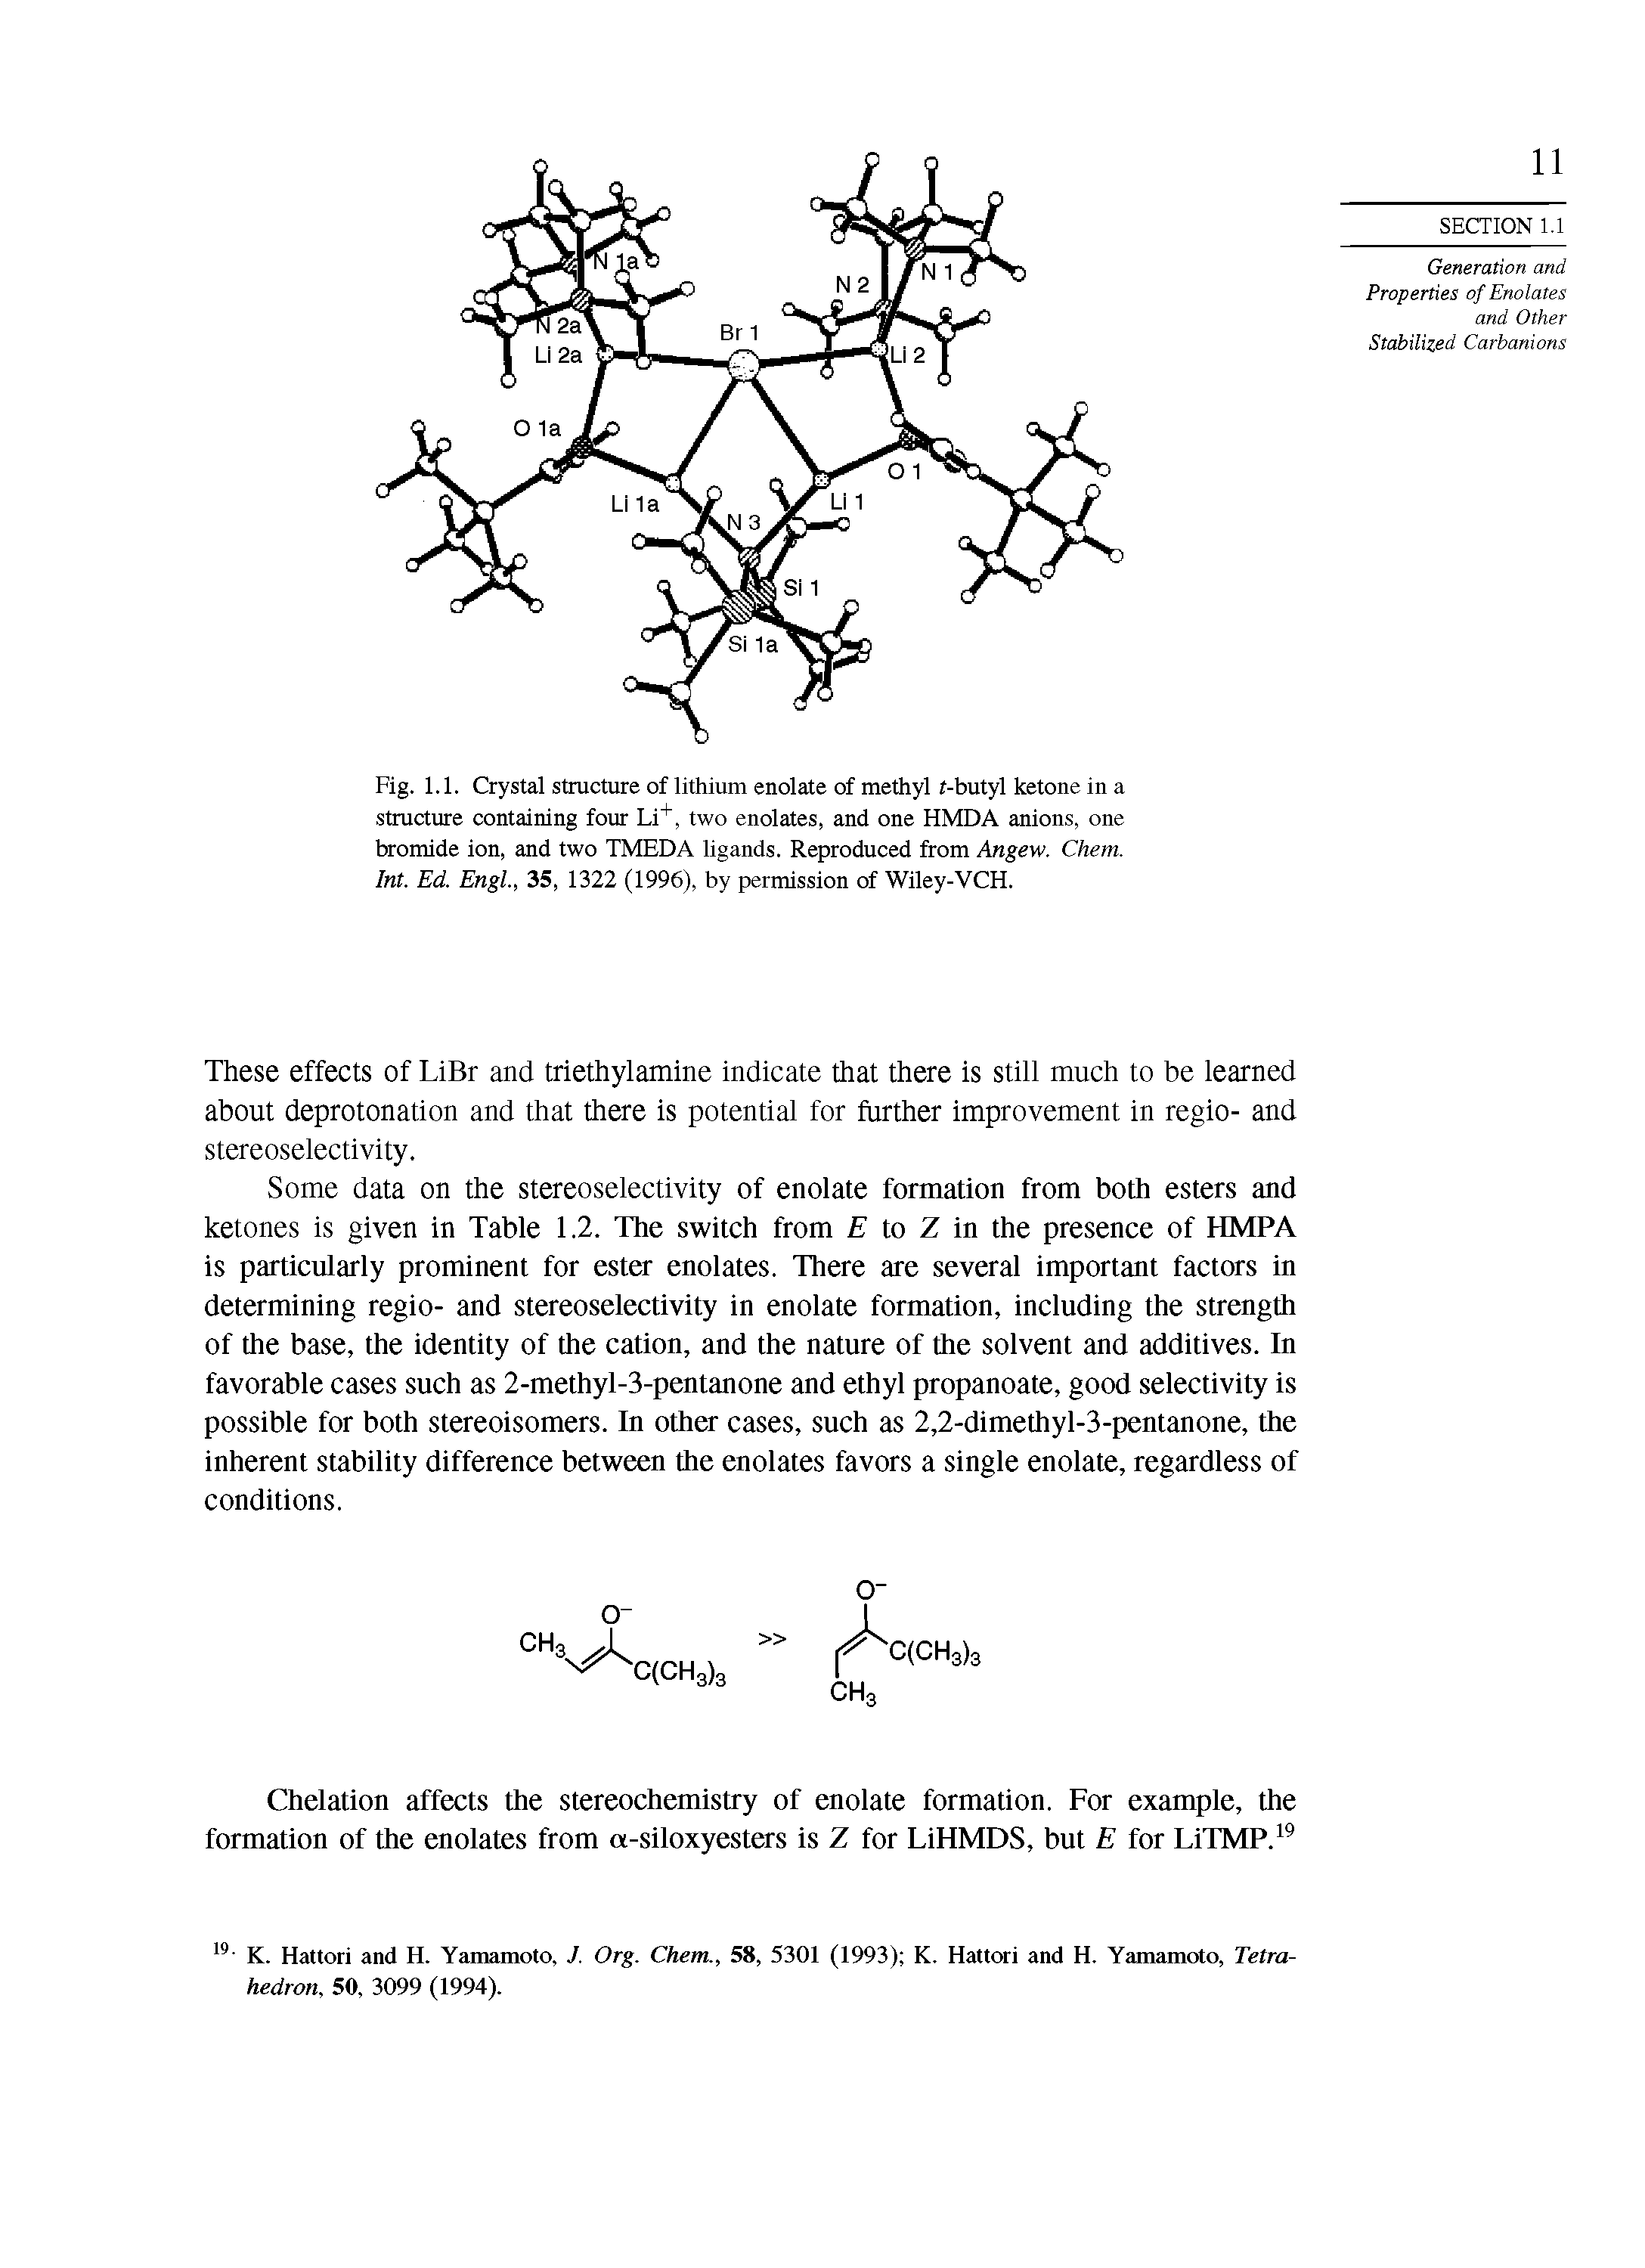 Fig. 1.1. Crystal structure of lithium enolate of methyl -butyl ketone in a structure containing four Li+, two enolates, and one HMDA anions, one bromide ion, and two TMEDA ligands. Reproduced from Angew. Chem. Int. Ed. Engl., 35, 1322 (1996), by permission of Wiley-VCH.